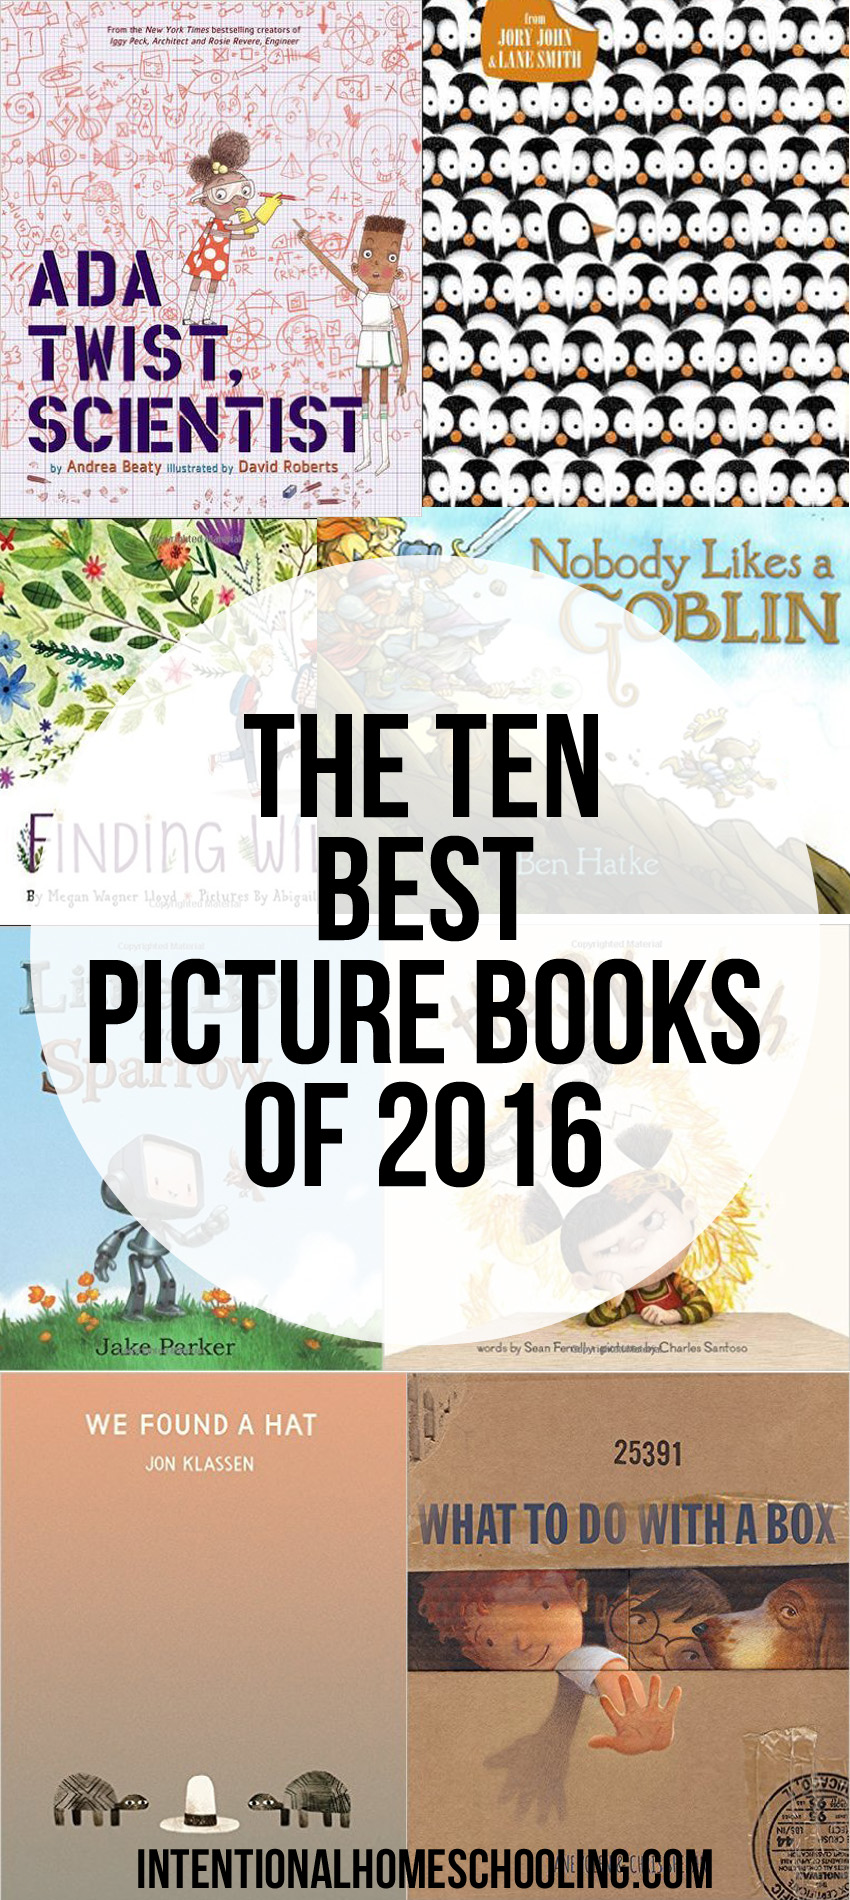 The Best Picture Books of 2016